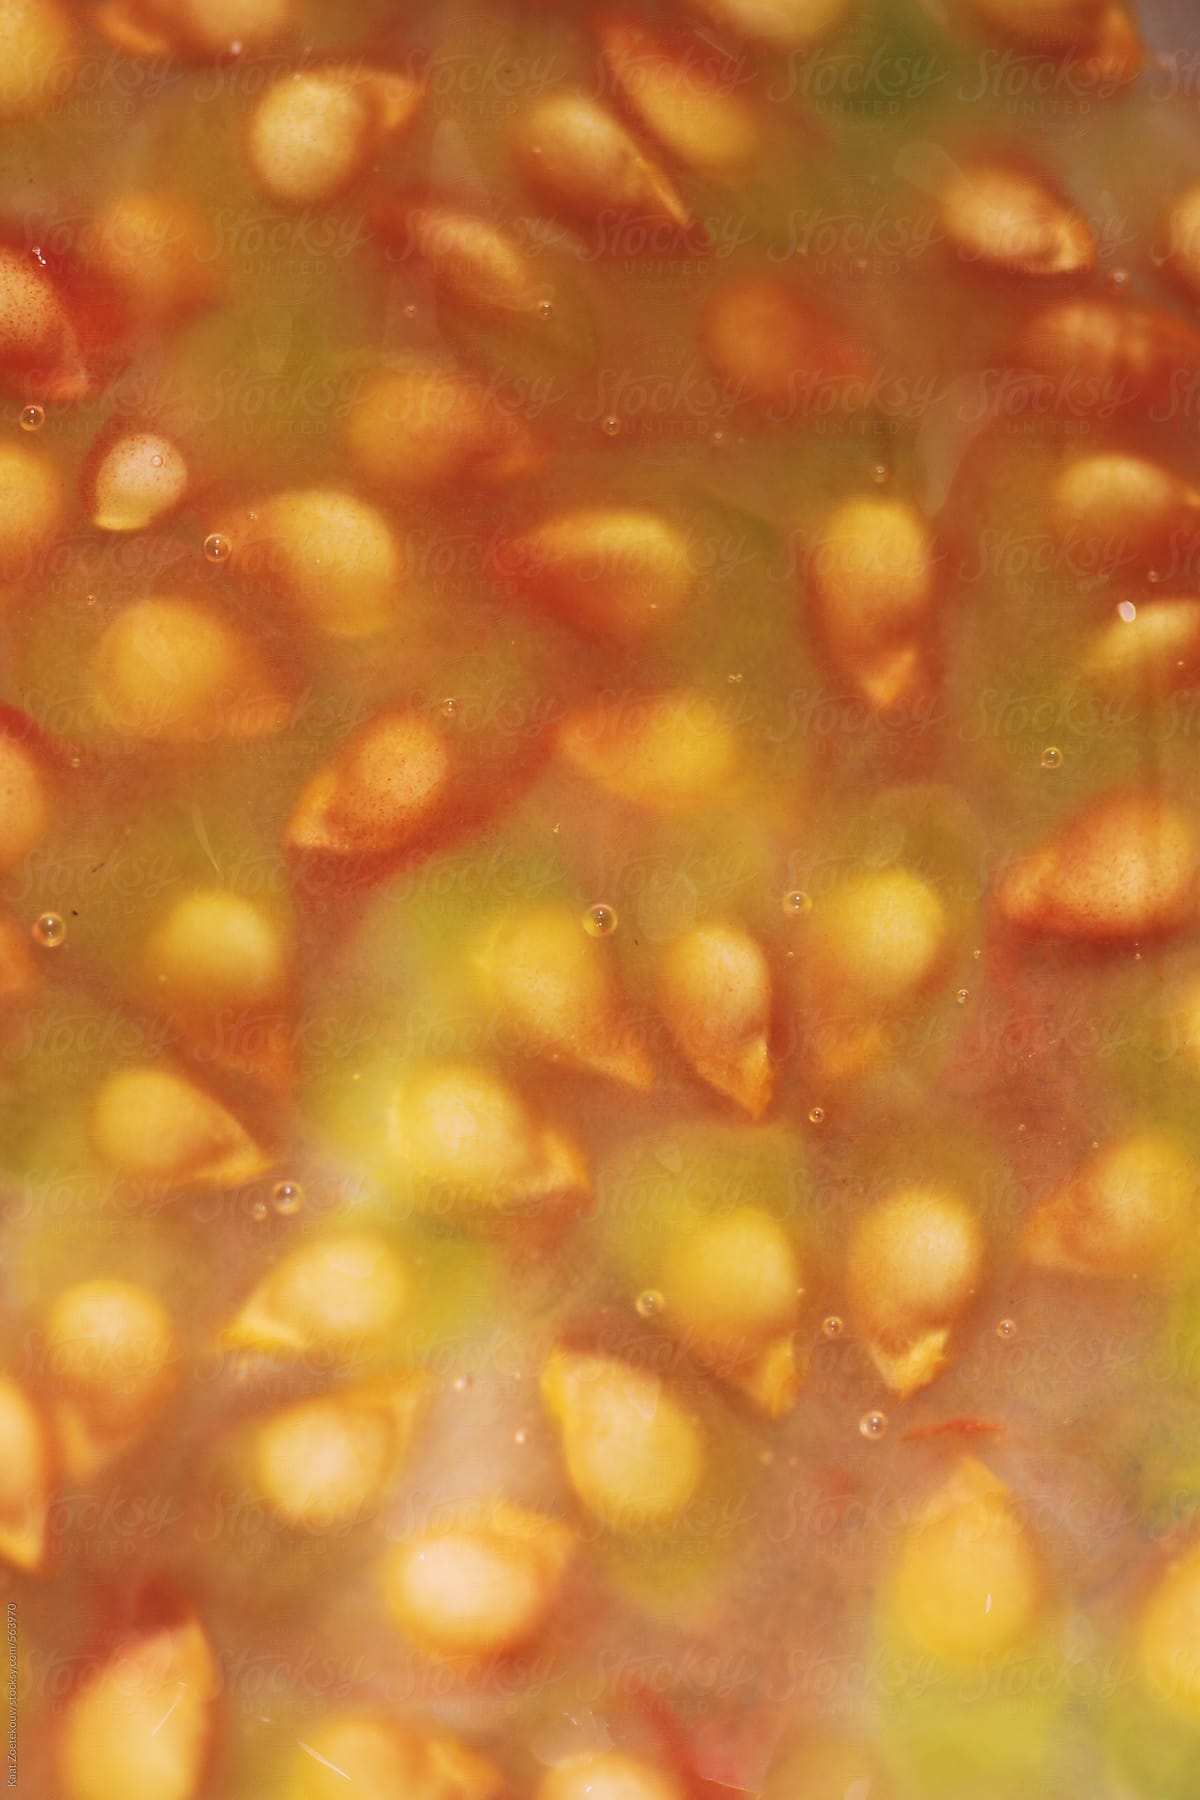 Closeup of a multitude of tomato seeds soaking in water